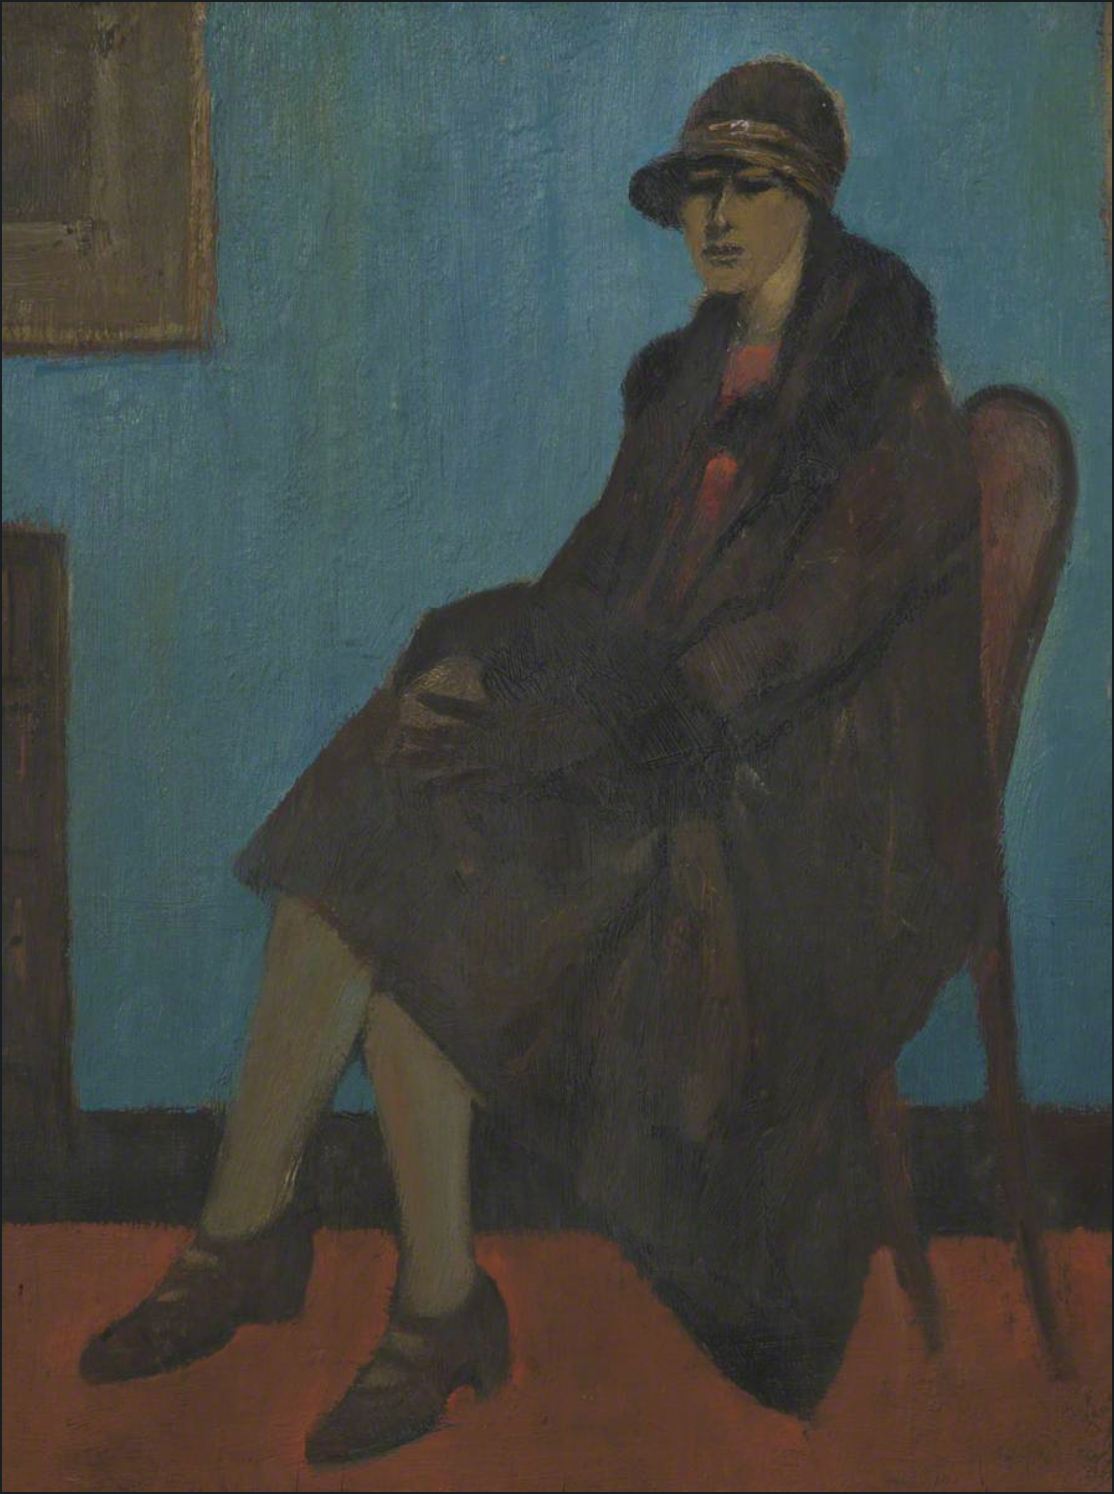 Woman in a Chair (1921) by Laurence Stephen Lowry (1887 - 1976), English artist.